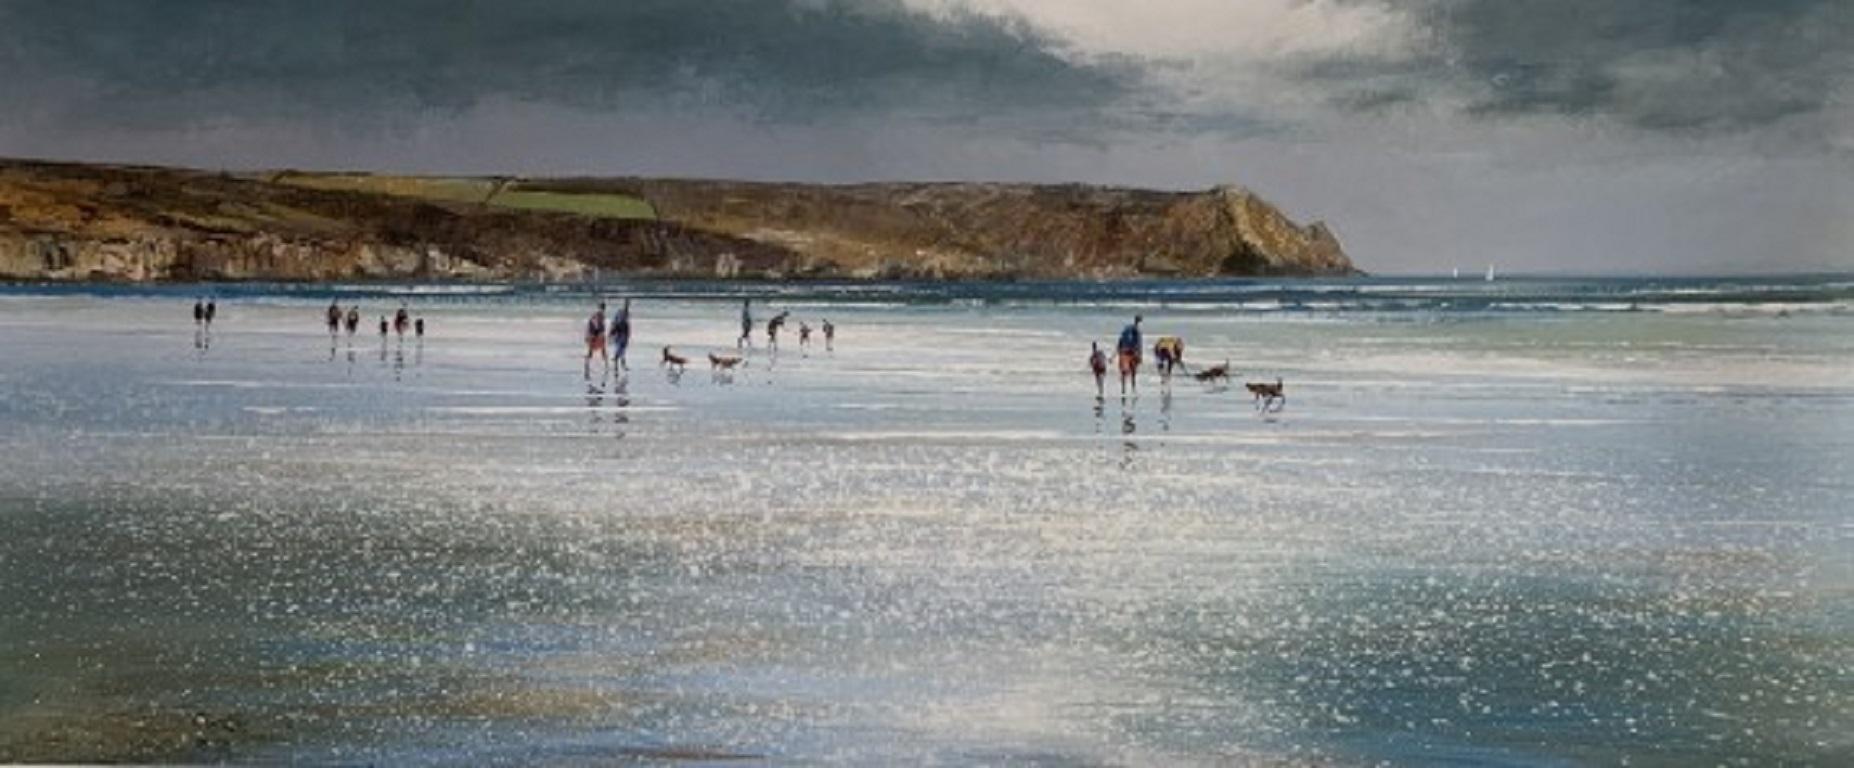 Nare Head, Carne Beach By Michael Sanders [2021]
limited_edition

Additional information:
Giclée print on paper 
Edition of 50 
50 cm x W:120cm
Sold Unframed and arrives rolled 
Please note that insitu images are purely an indication of how a piece